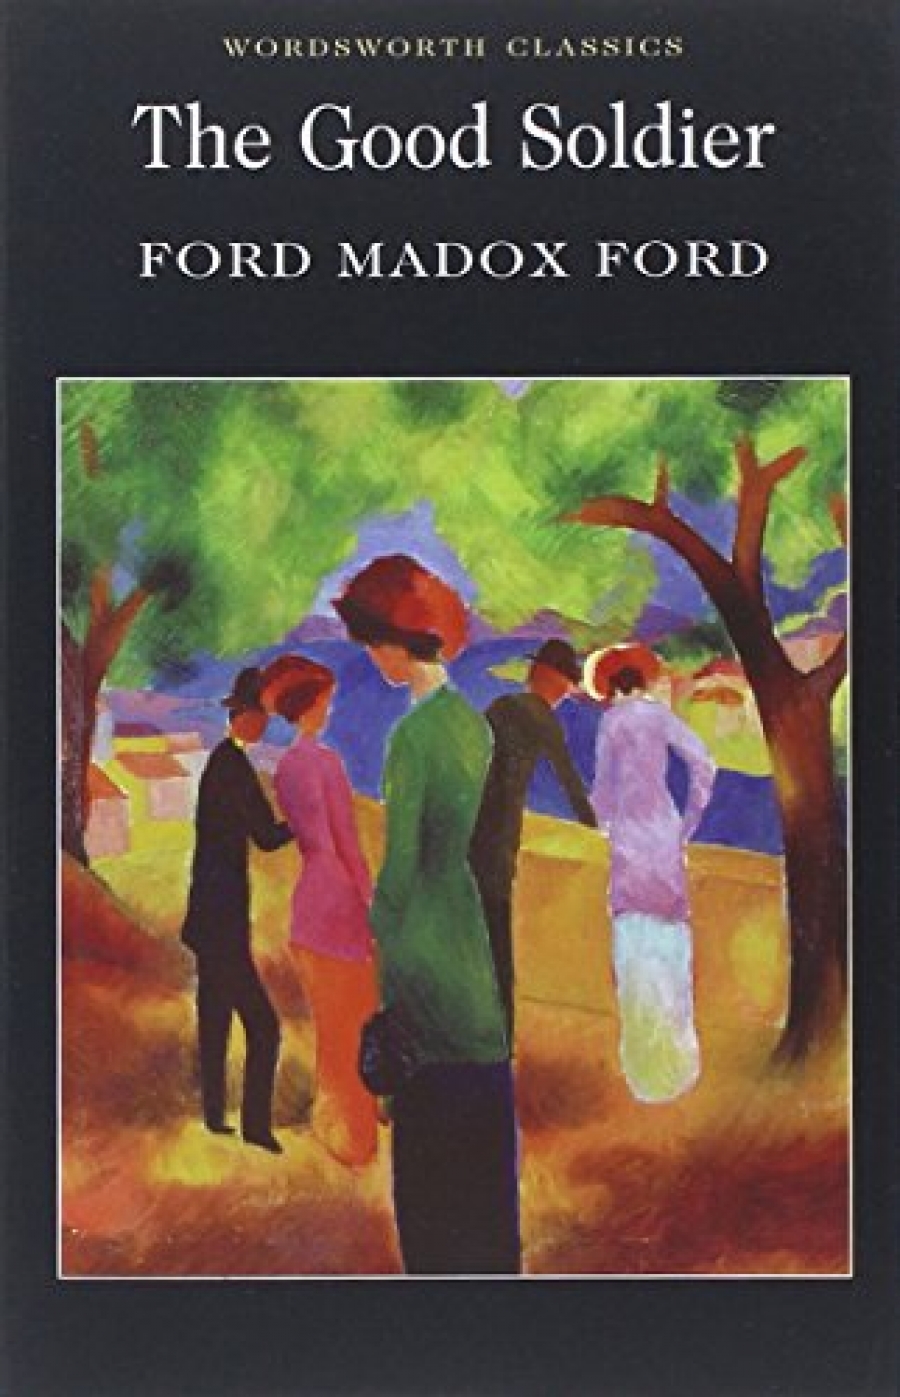 Ford, Ford Madox The Good Soldier 